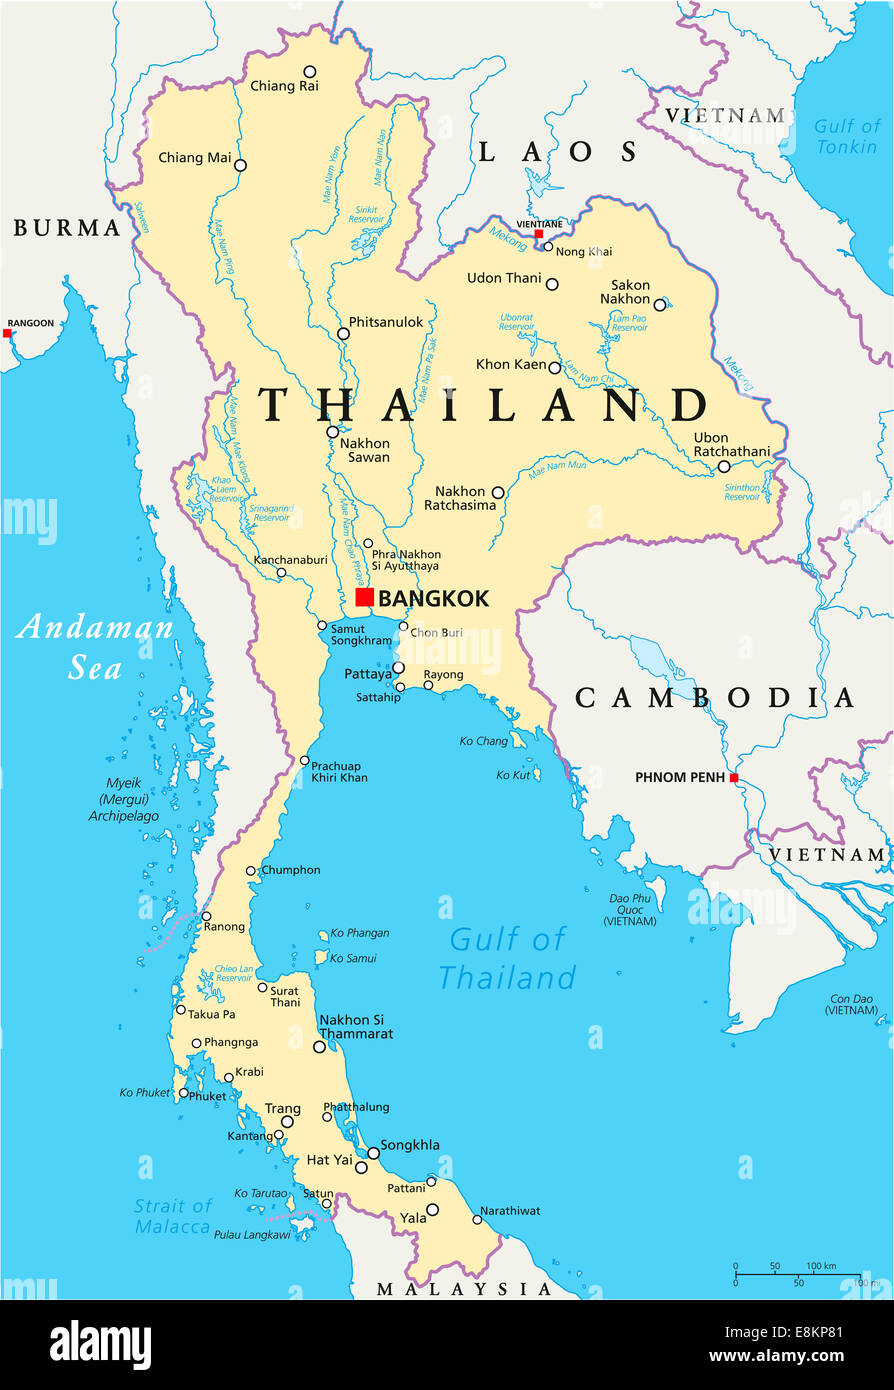 Thailand Political Map with capital Bangkok, national borders, most important cities, rivers and lakes. English labeling. Stock Photo